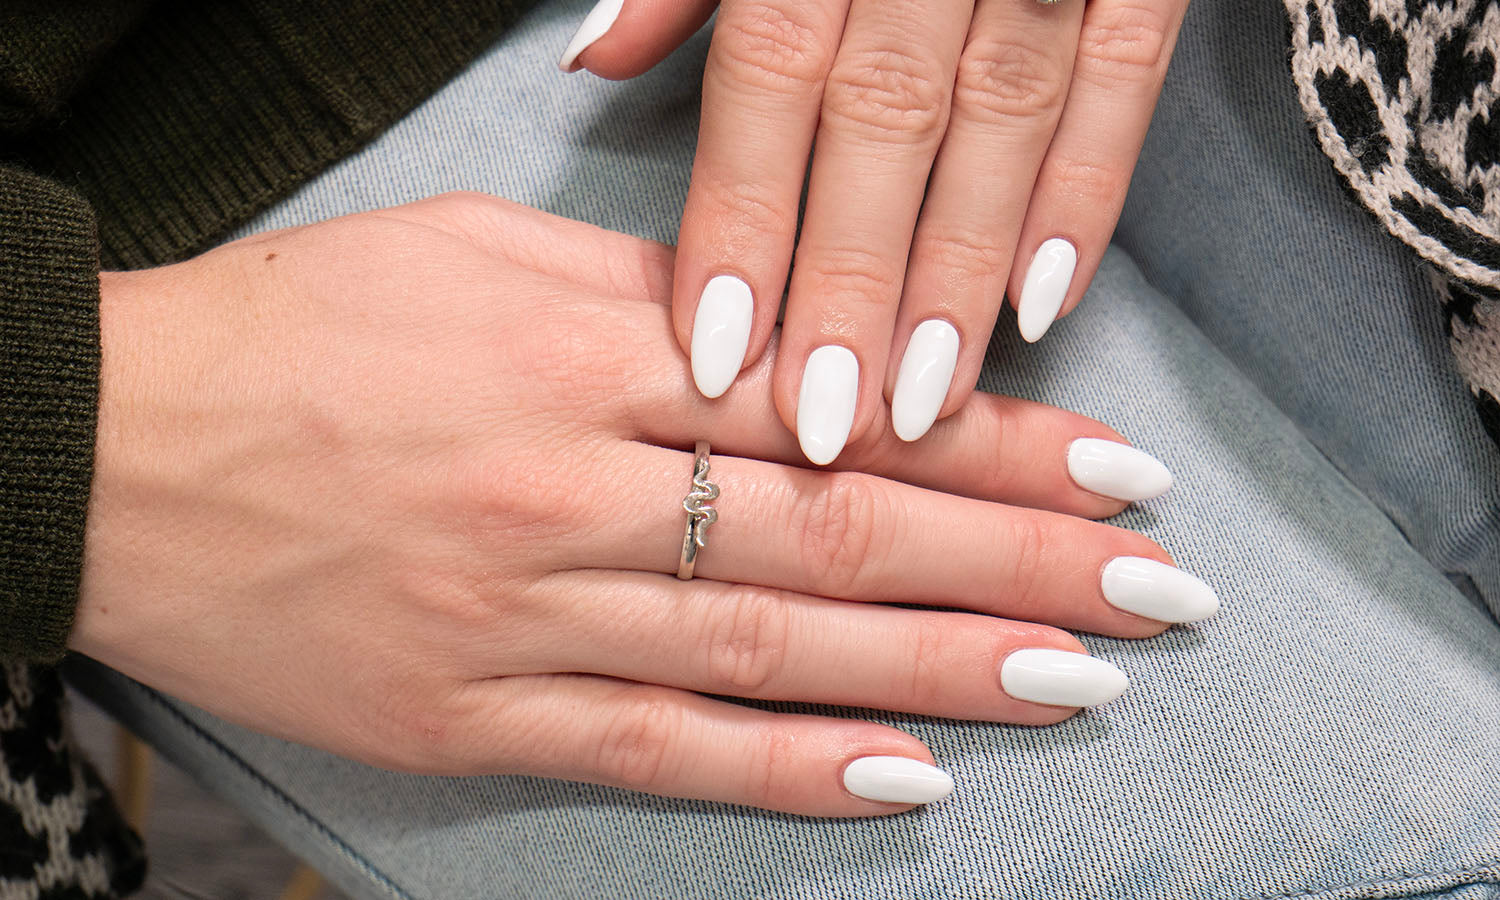 Gelous Whiteout gel nail polish - photographed in Australia on model